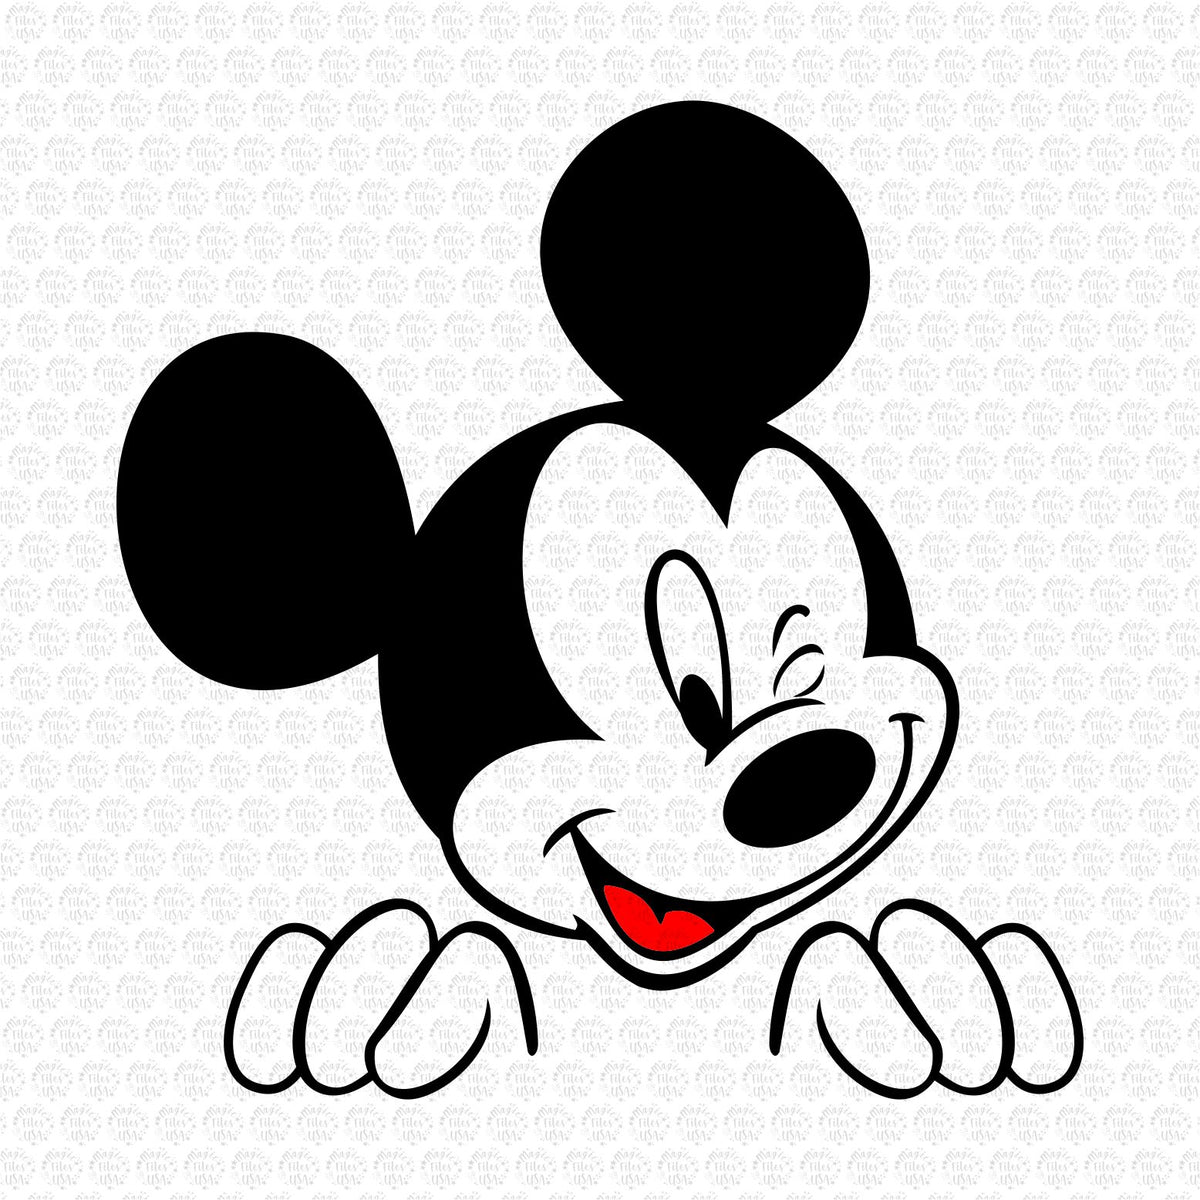 Download Winking Mickey Mouse Svg, Minnie Face Svg, Download Files, Svg Files, Mickey Mouse Svg, Disney ...